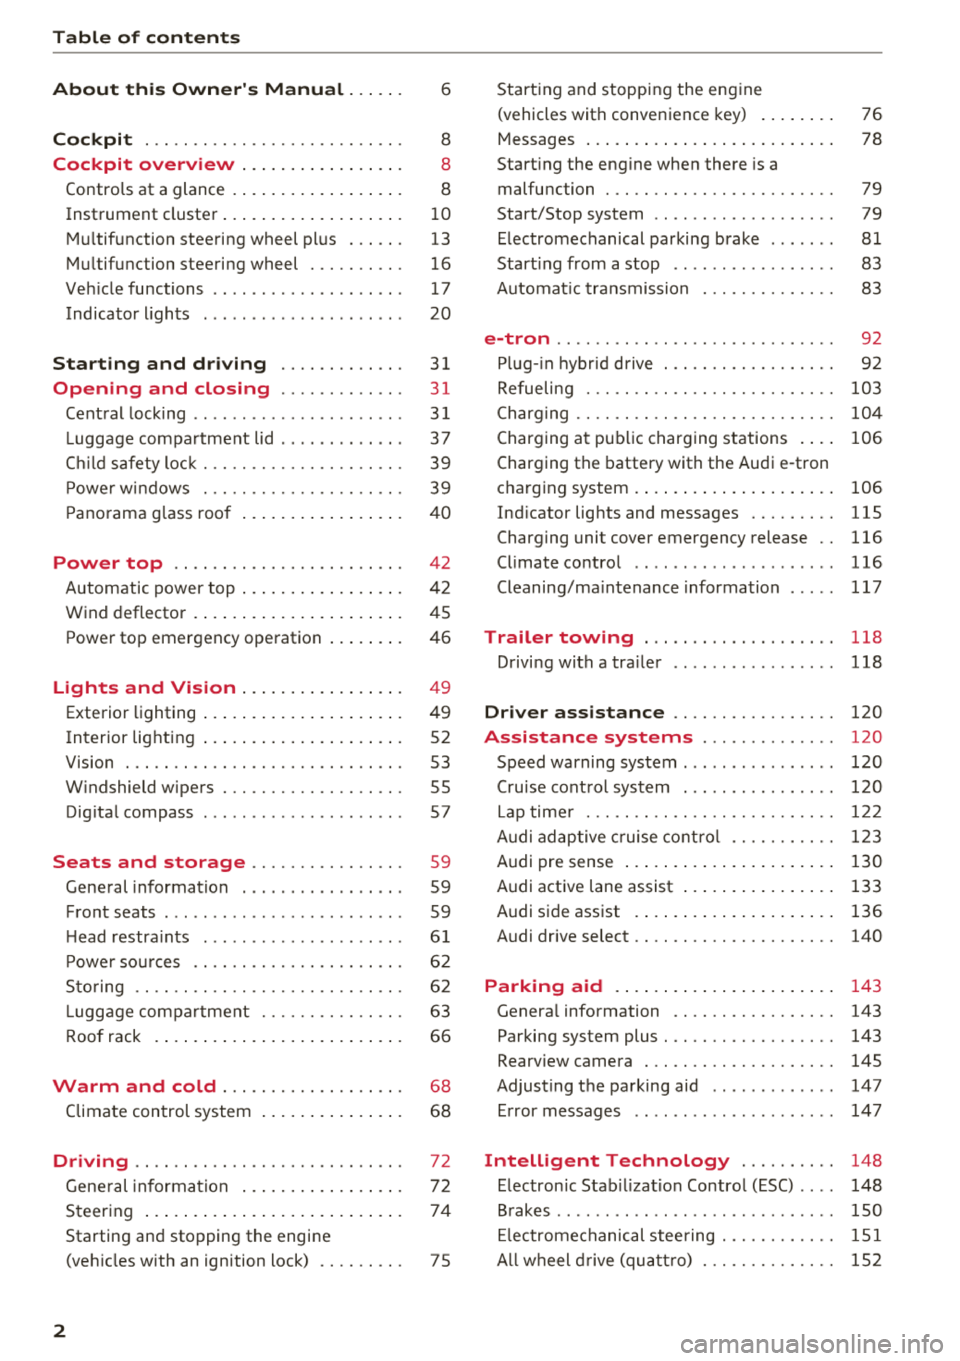 AUDI A3 SEDAN 2018  Owners Manual Table of  contents 
About  this  Owners  Manual.  . .  . . . 
6 
Cockpit  . . .  . .  . . . . . . . . . . . . . . .  . . . .  . .  . 8 
Cockpit  overview  . .  . . . . .  . . .  . .  . .  . . . 8 
Co